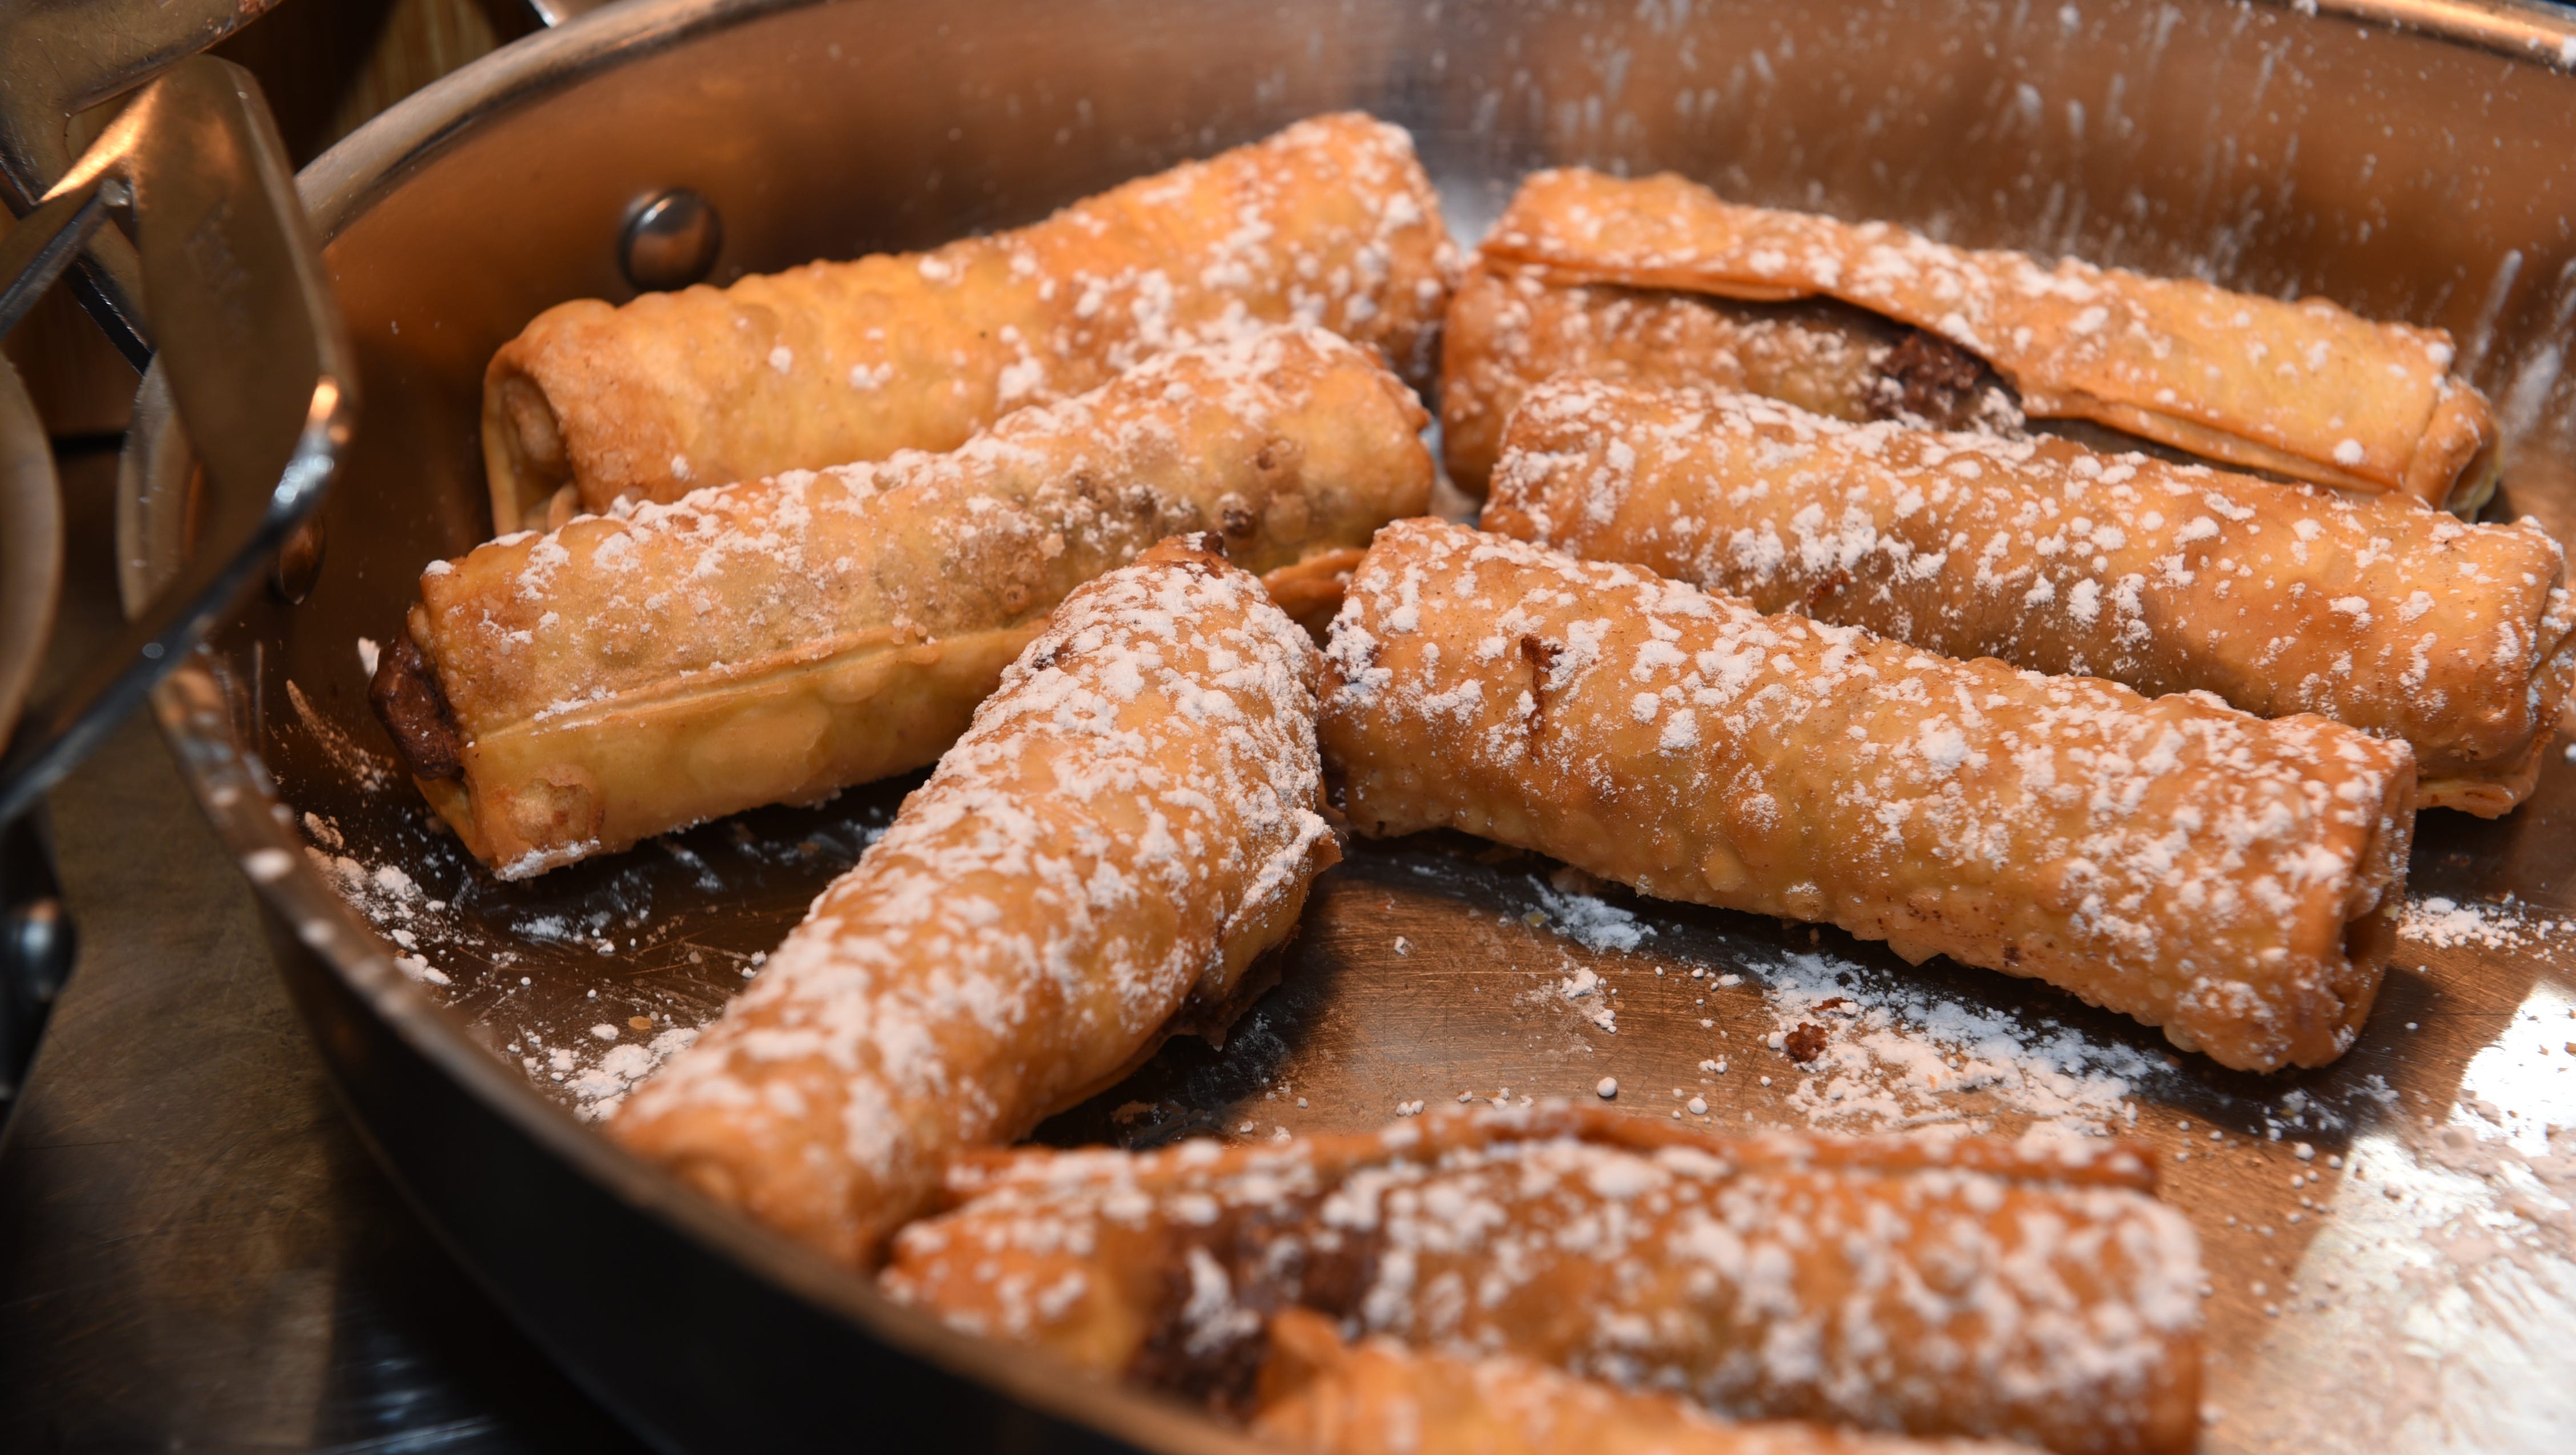 The Nutella Egg Roll is one of the many new additions at Comerica Park.